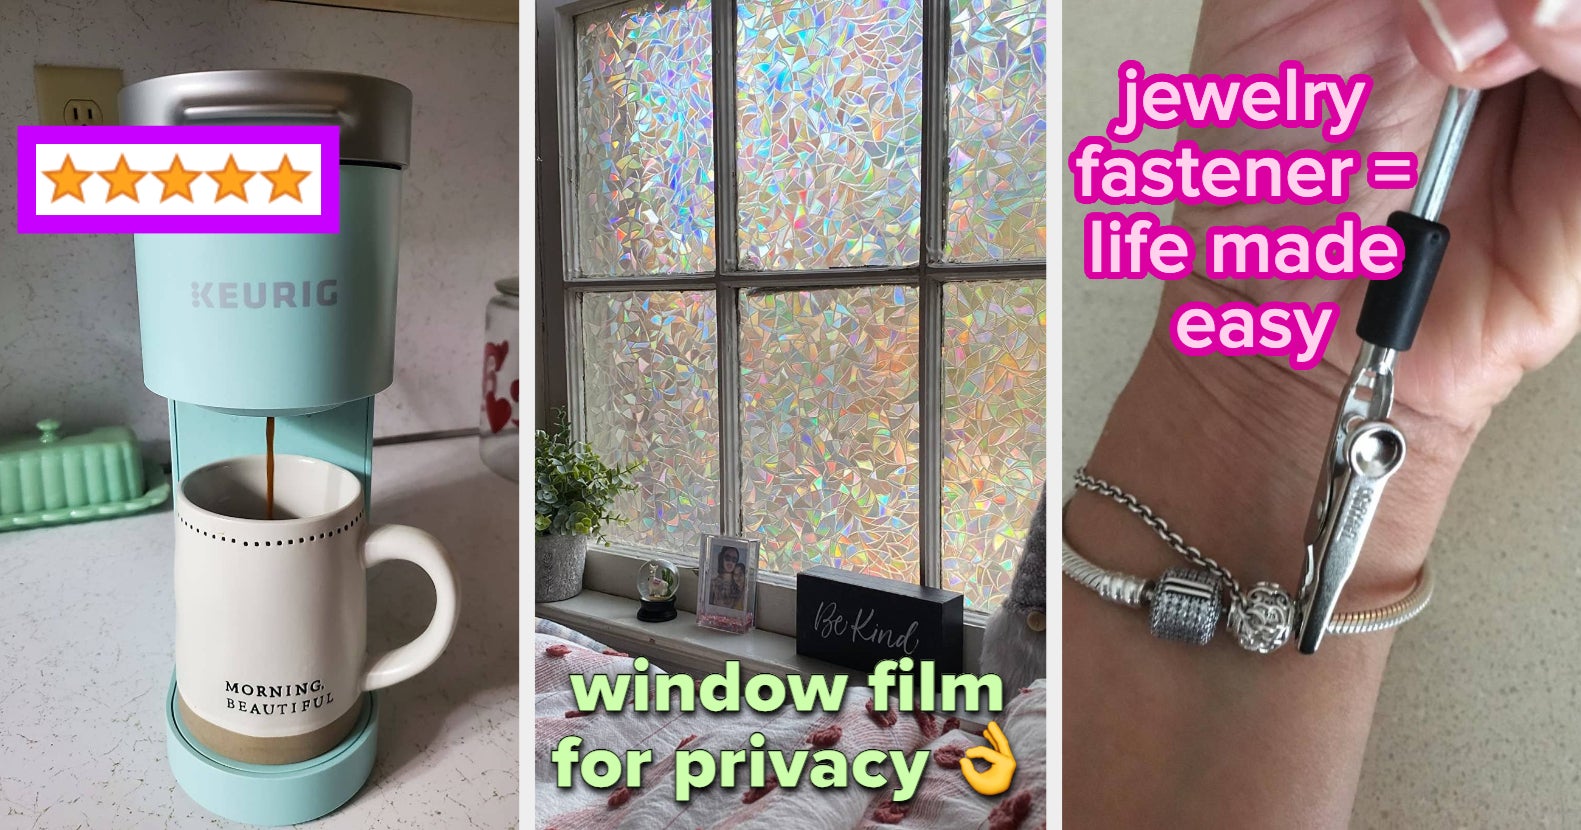 17 Useful Products You Need if You Live Alone